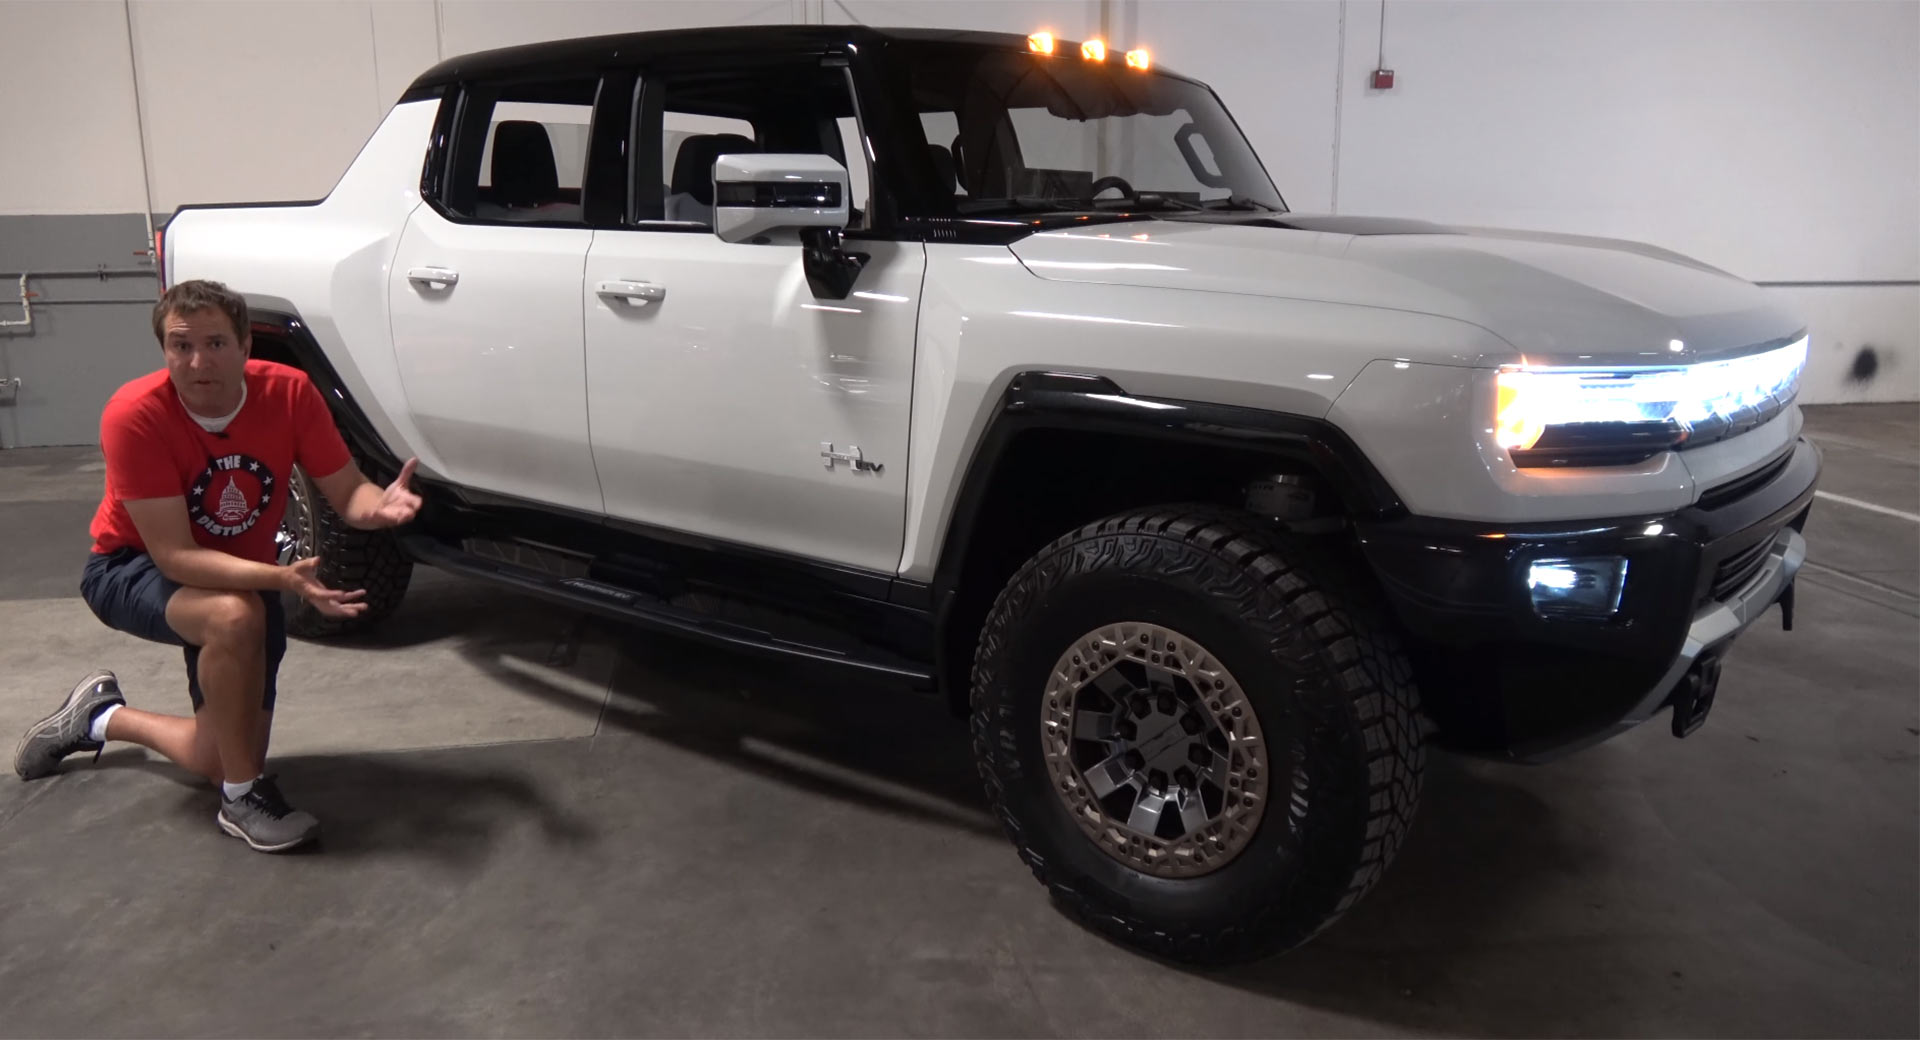 The Gmc Hummer Ev Has Lots Of Hidden Cool Features Carscoops